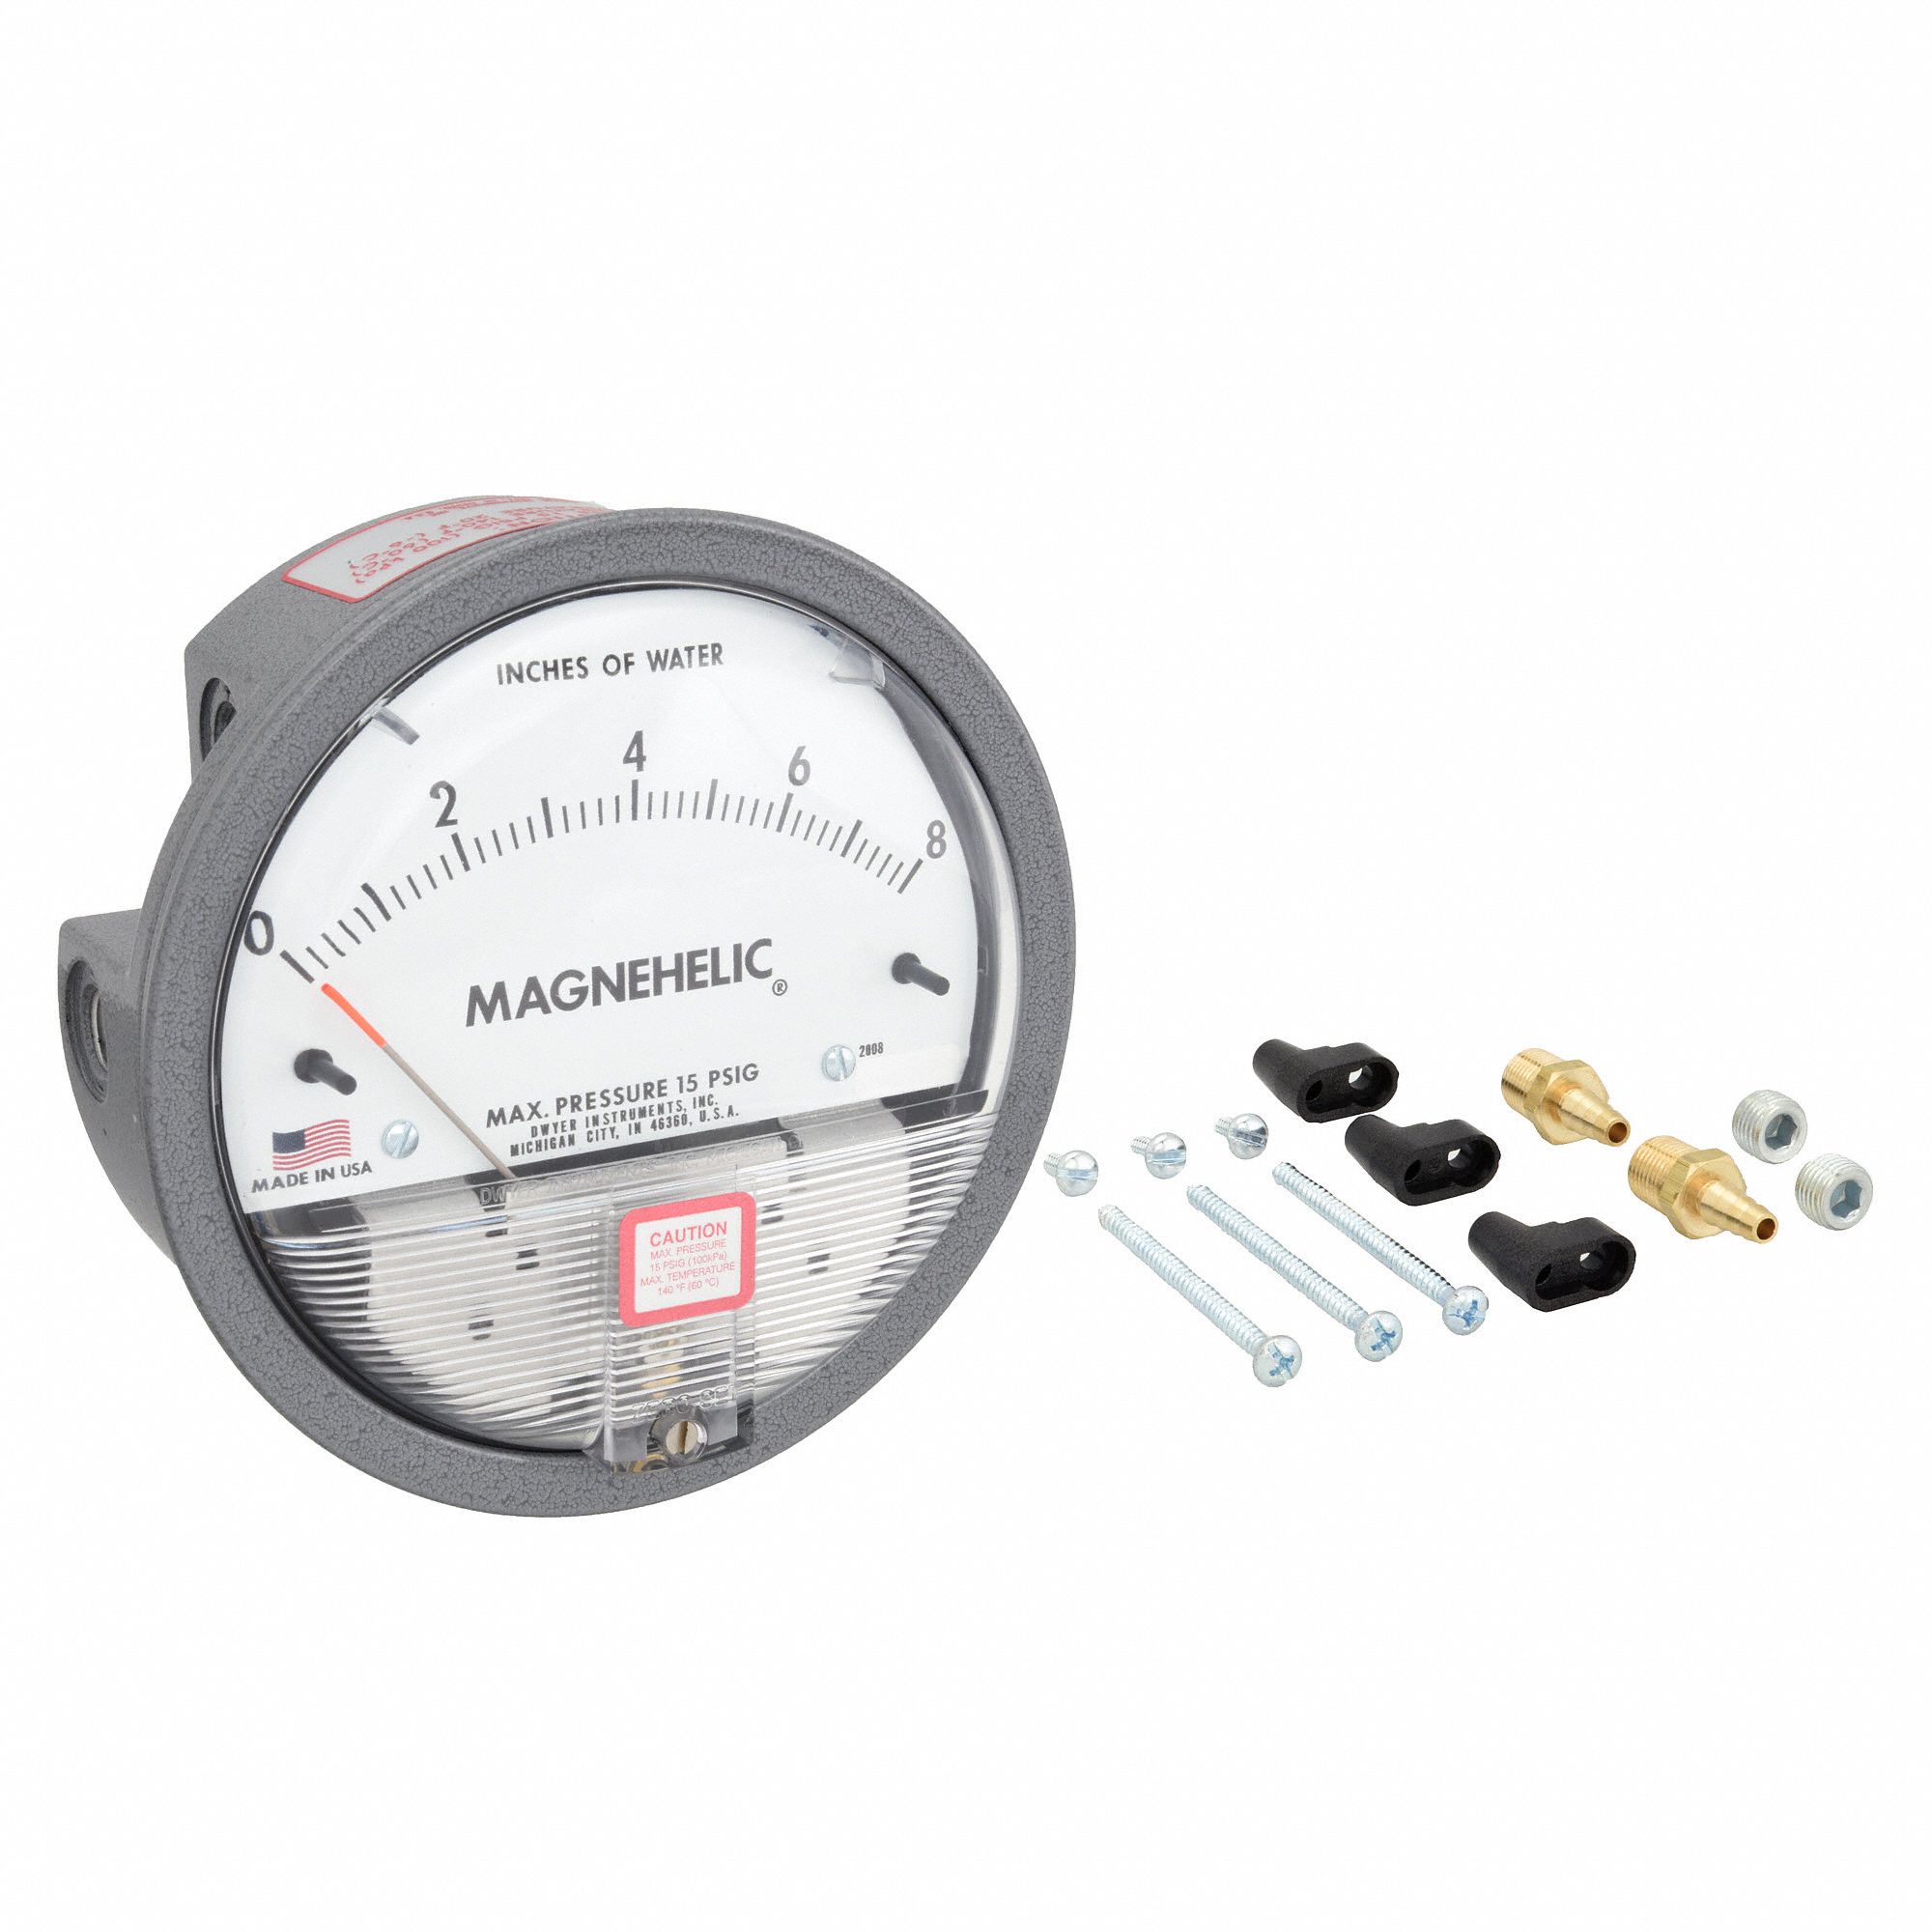 Magnehelic 2008  Differential Pressure Gauge 0-8 Inches of Water Max 15 PSIG 